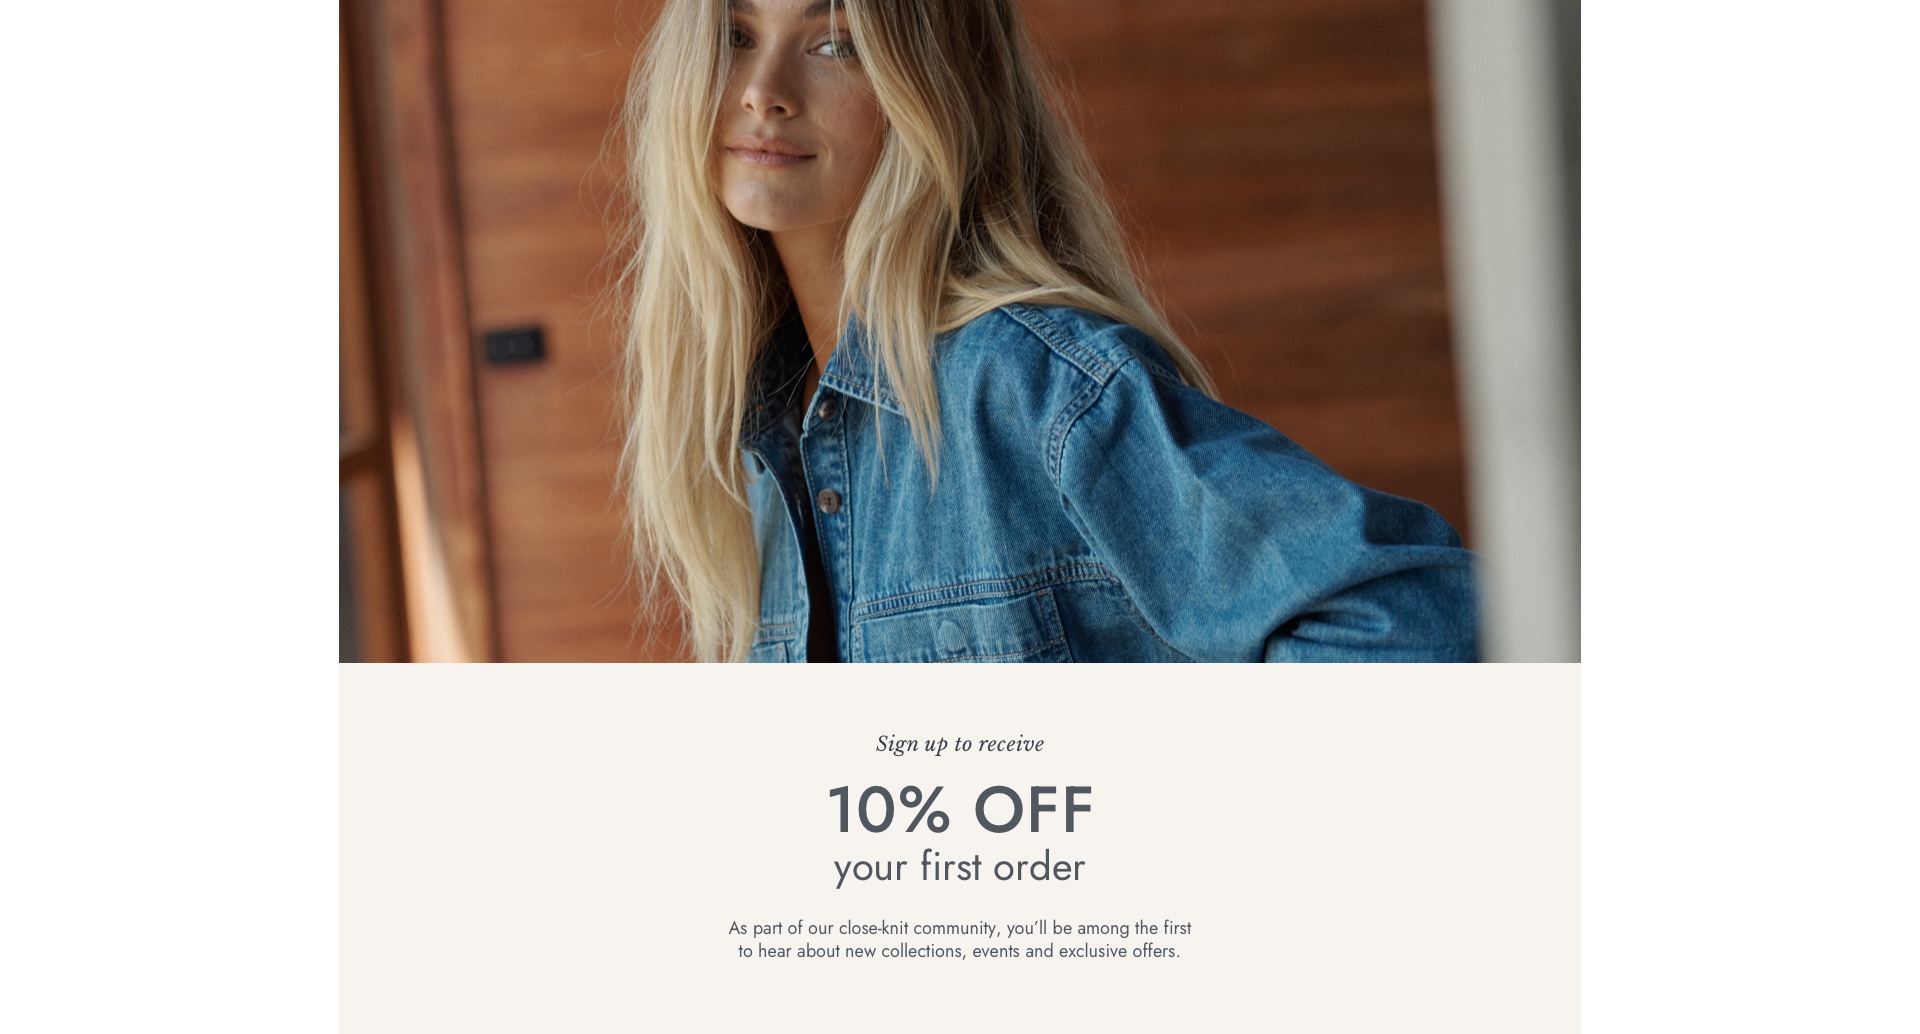 Become a part of our inner circle. Get 10% off your first order, Receive alerts for new product drops and early notice of sale